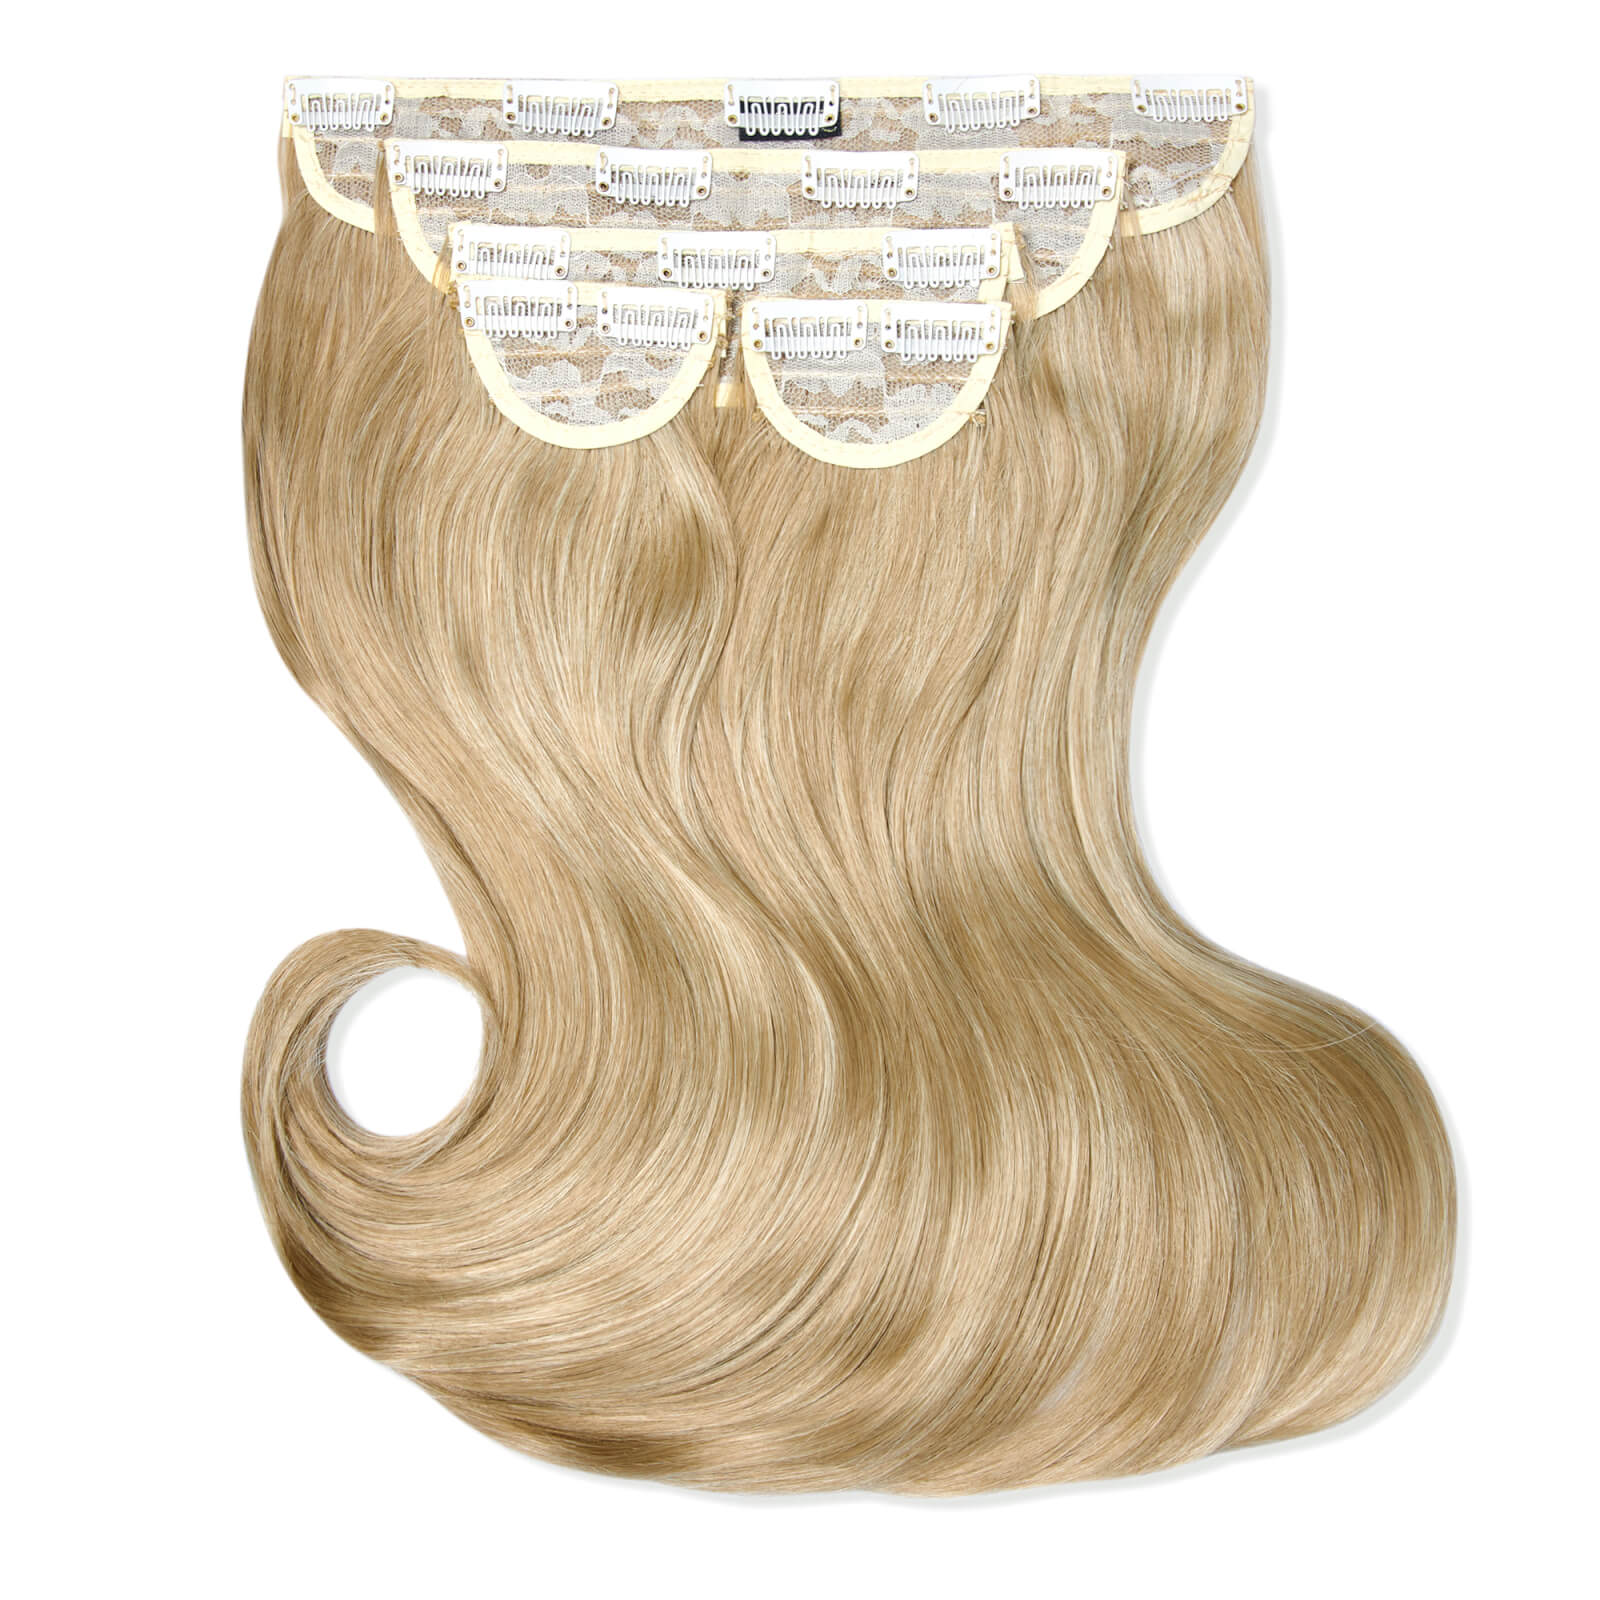 LullaBellz Super Thick 16  5 Piece Blow Dry Wavy Clip In Extensions (Various Shades) - Golden Blonde